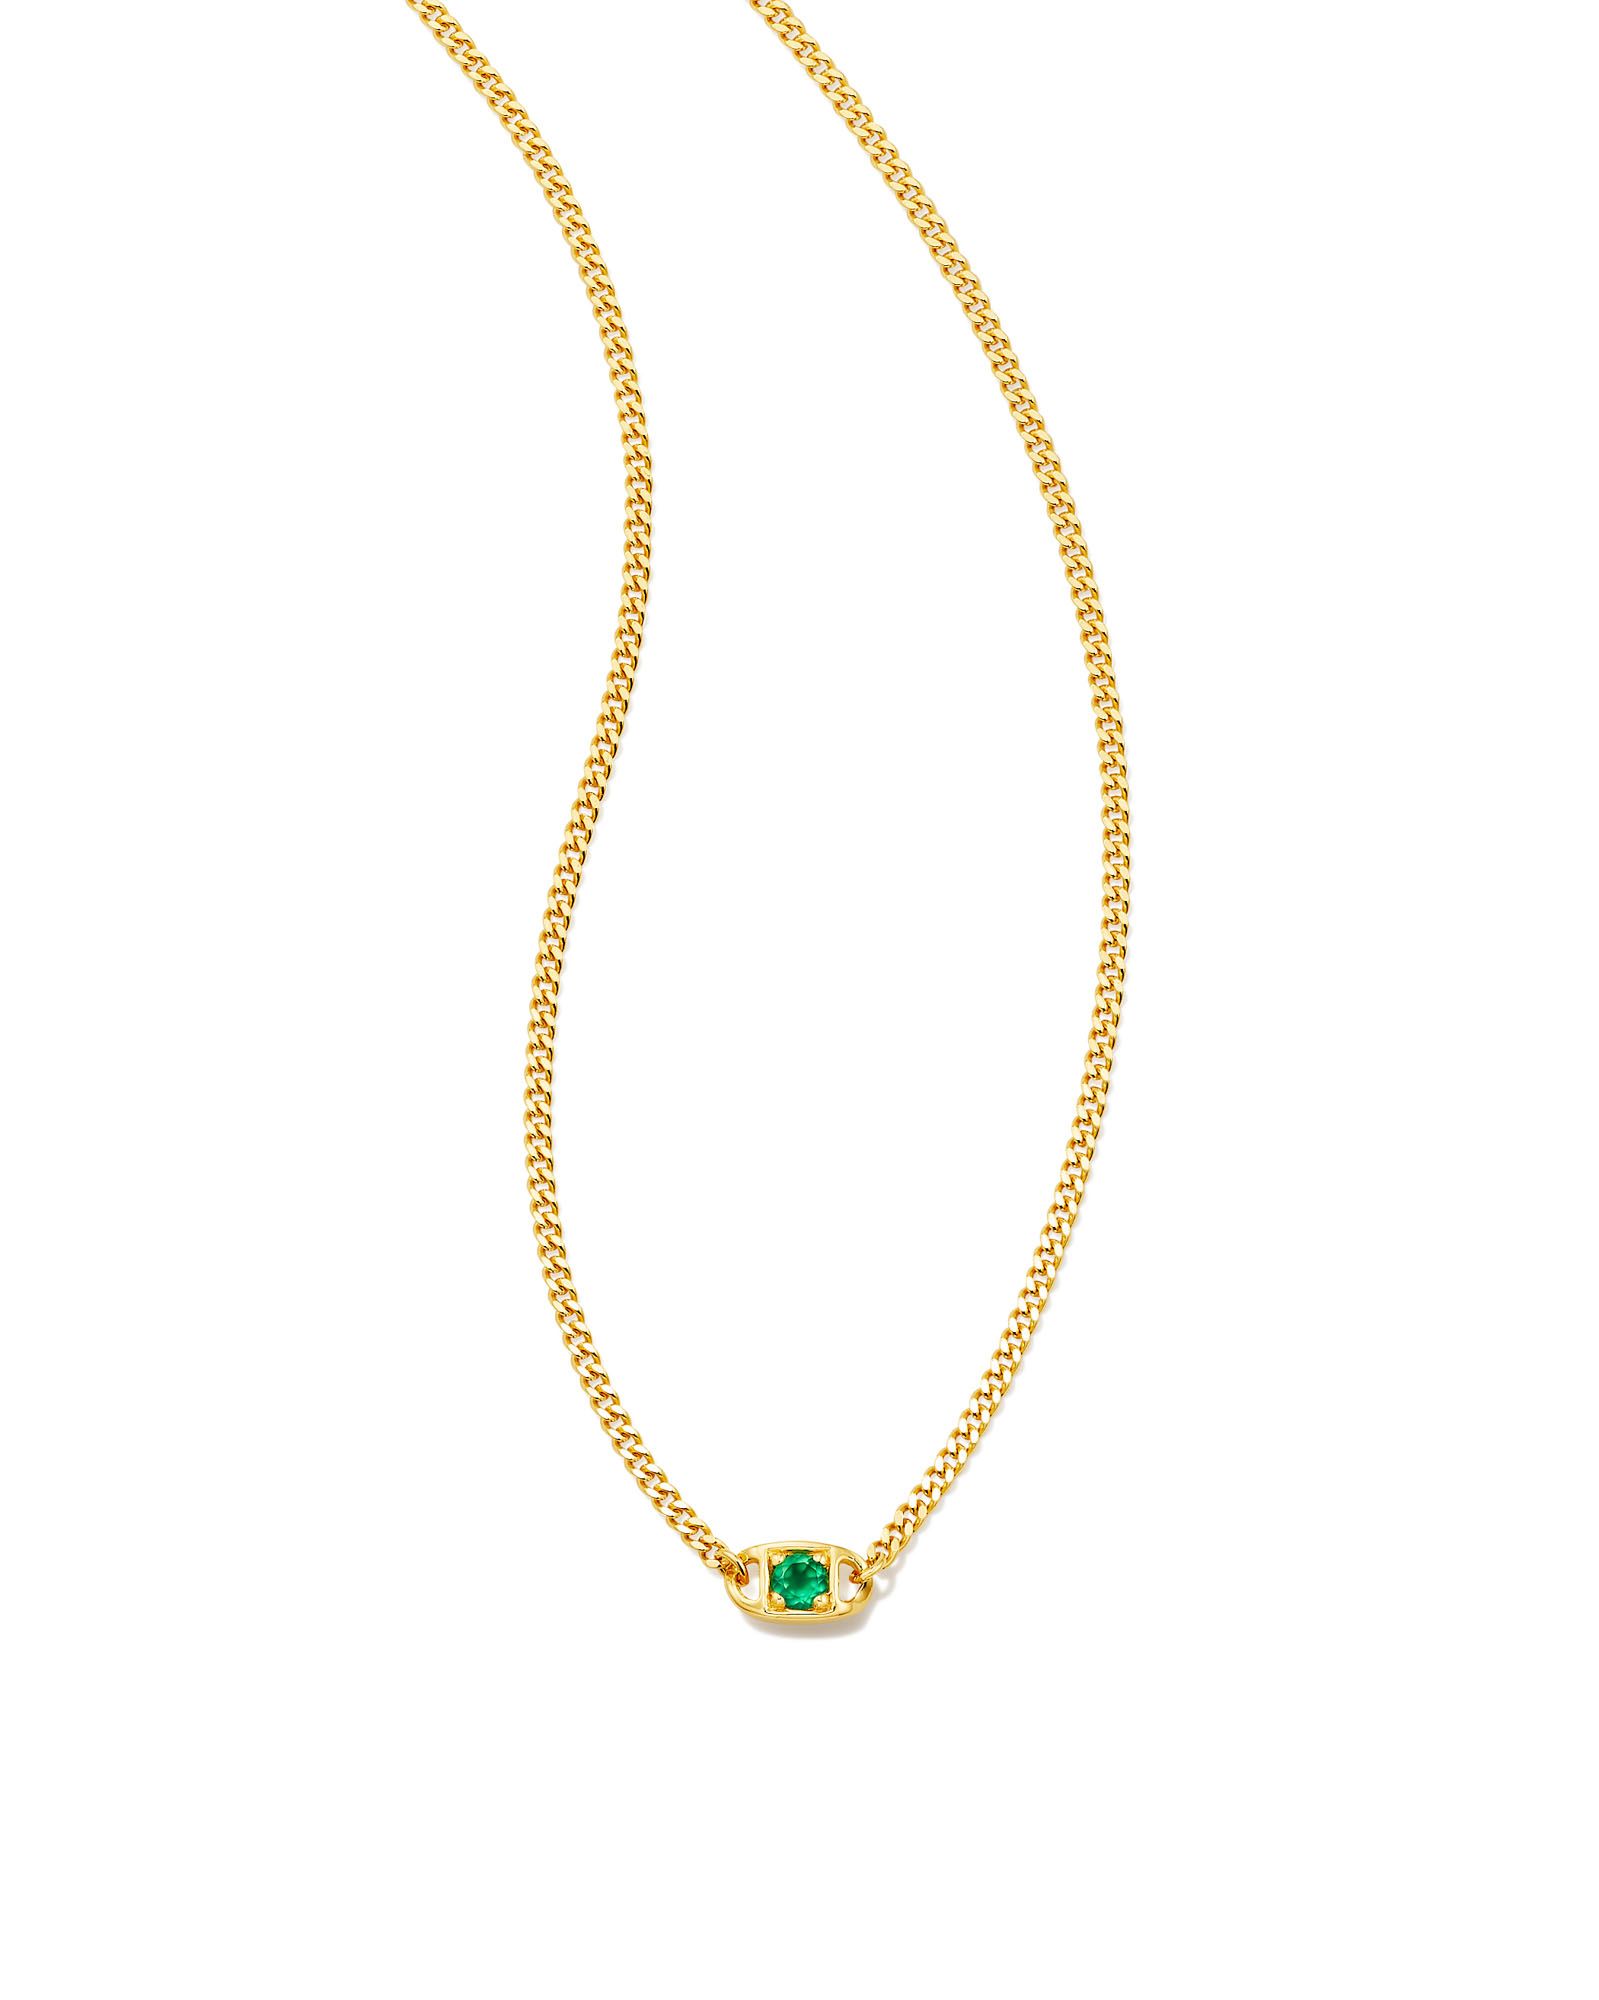 Delaney 18k Gold Vermeil Curb Chain Pendant Necklace in Green Onyx | Kendra Scott